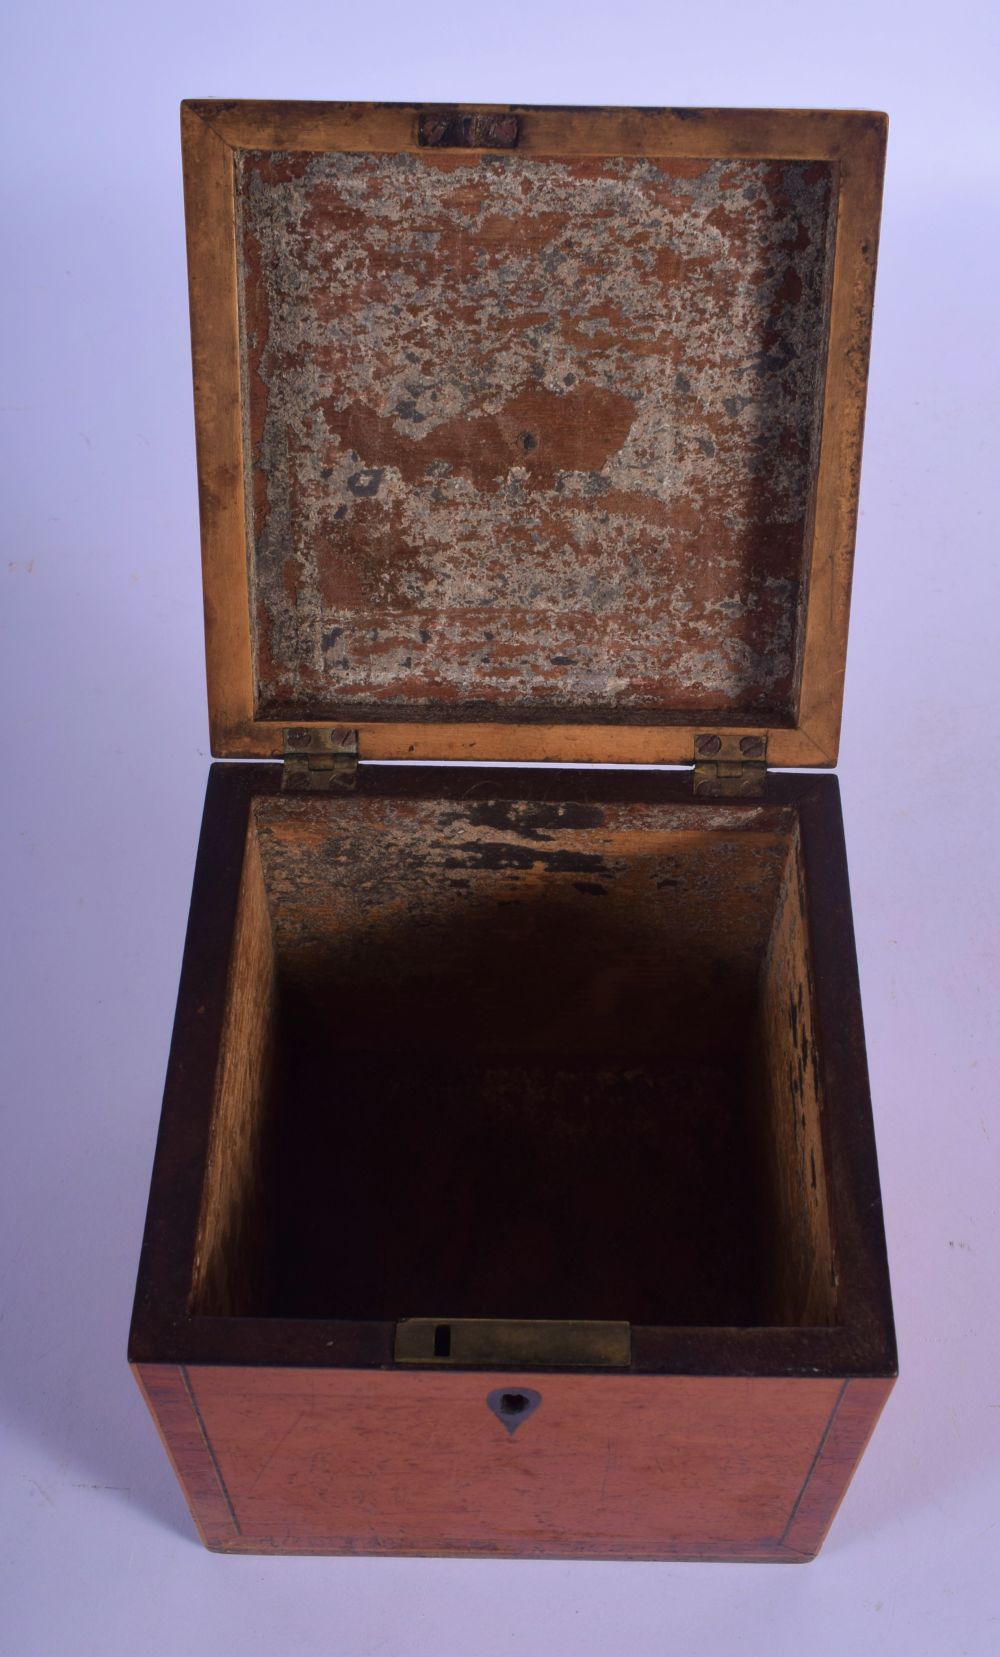 A GEORGE III MAHOGANY SQUARE FORM TEA CADDY decorated with a central shell form motif. 13 cm x 13 cm - Image 4 of 5